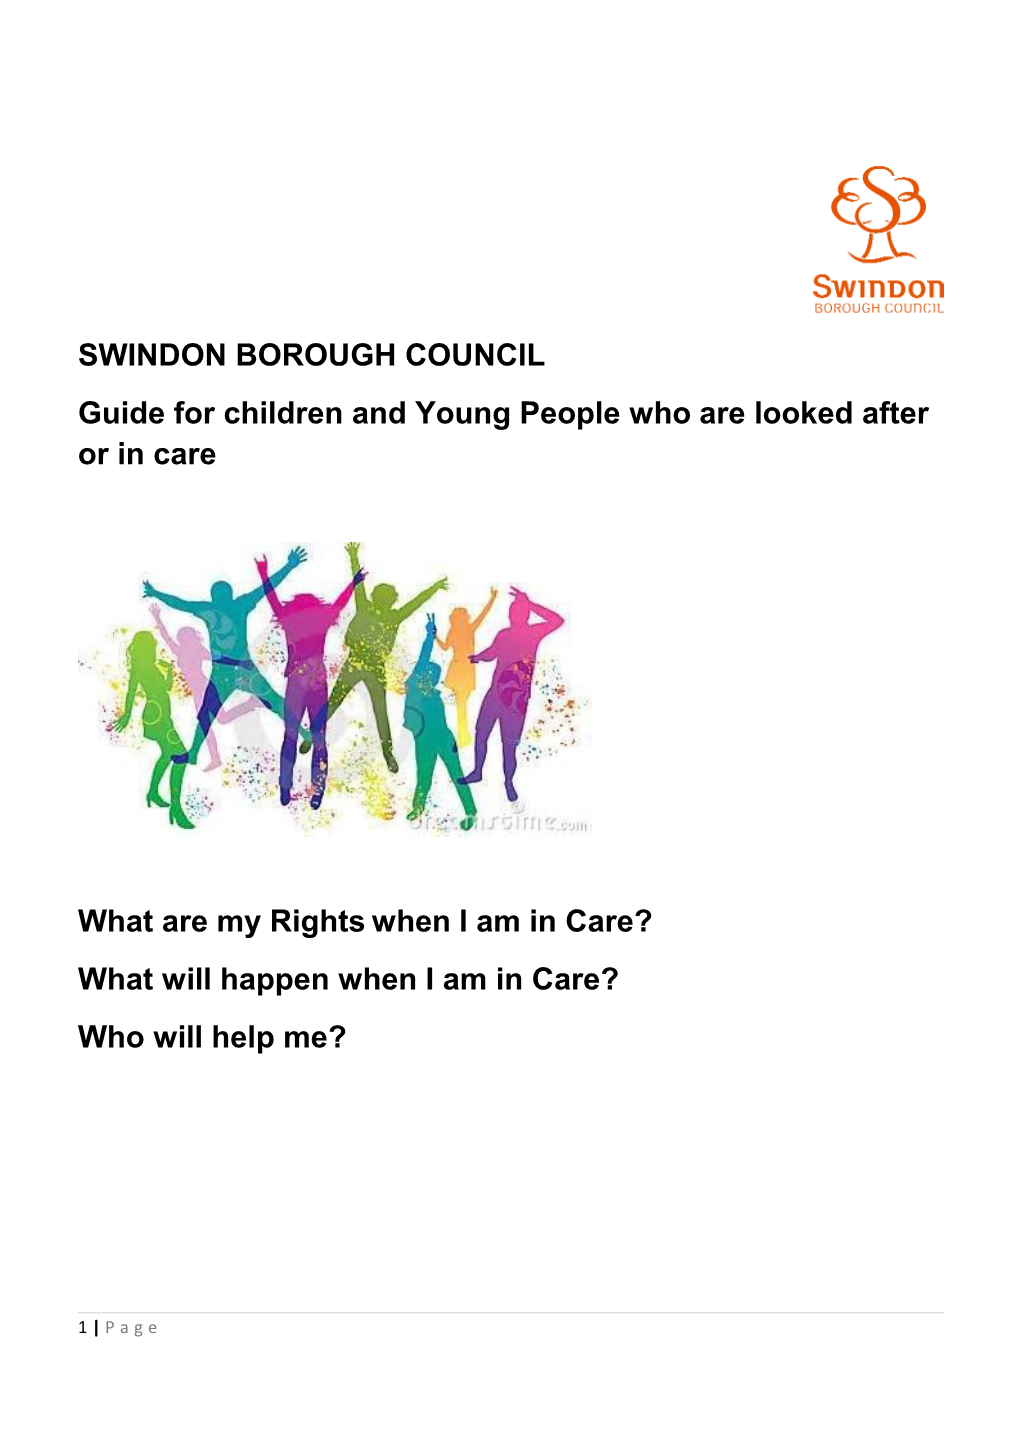 Guide for Children and Young People Who Are Looked After Or in Care